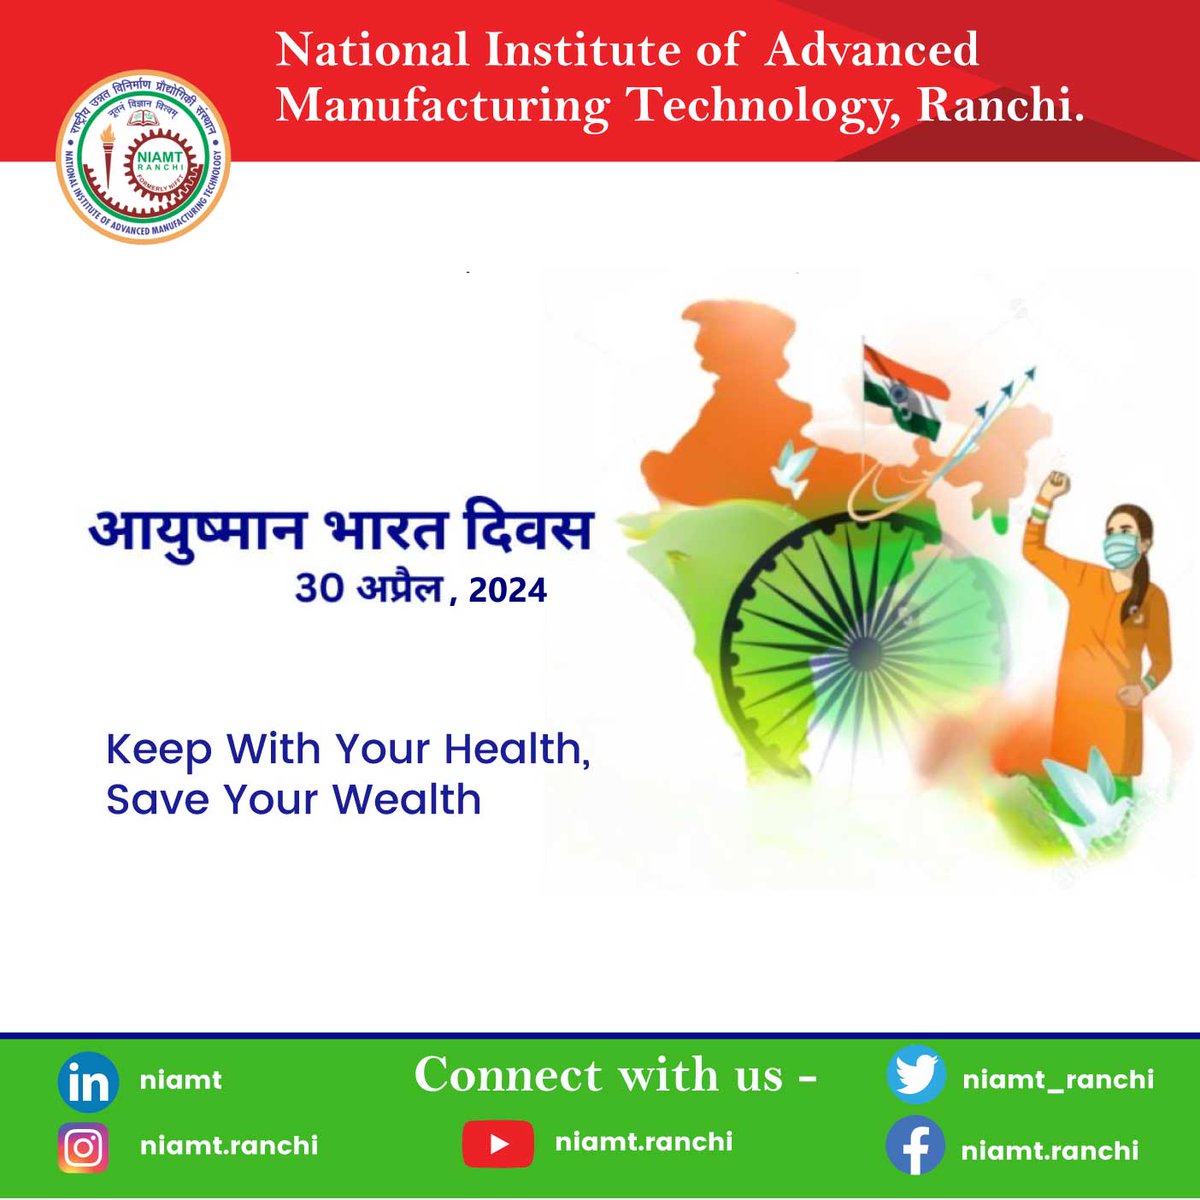 On #AyushmanBharat Diwas, we celebrate the impact of this transformative scheme launched in 2018, instrumental in safeguarding the health of millions of Indians. We at #NIAMT earnestly hope it continues to create a healthier society, ensuring access to resources for dignity.